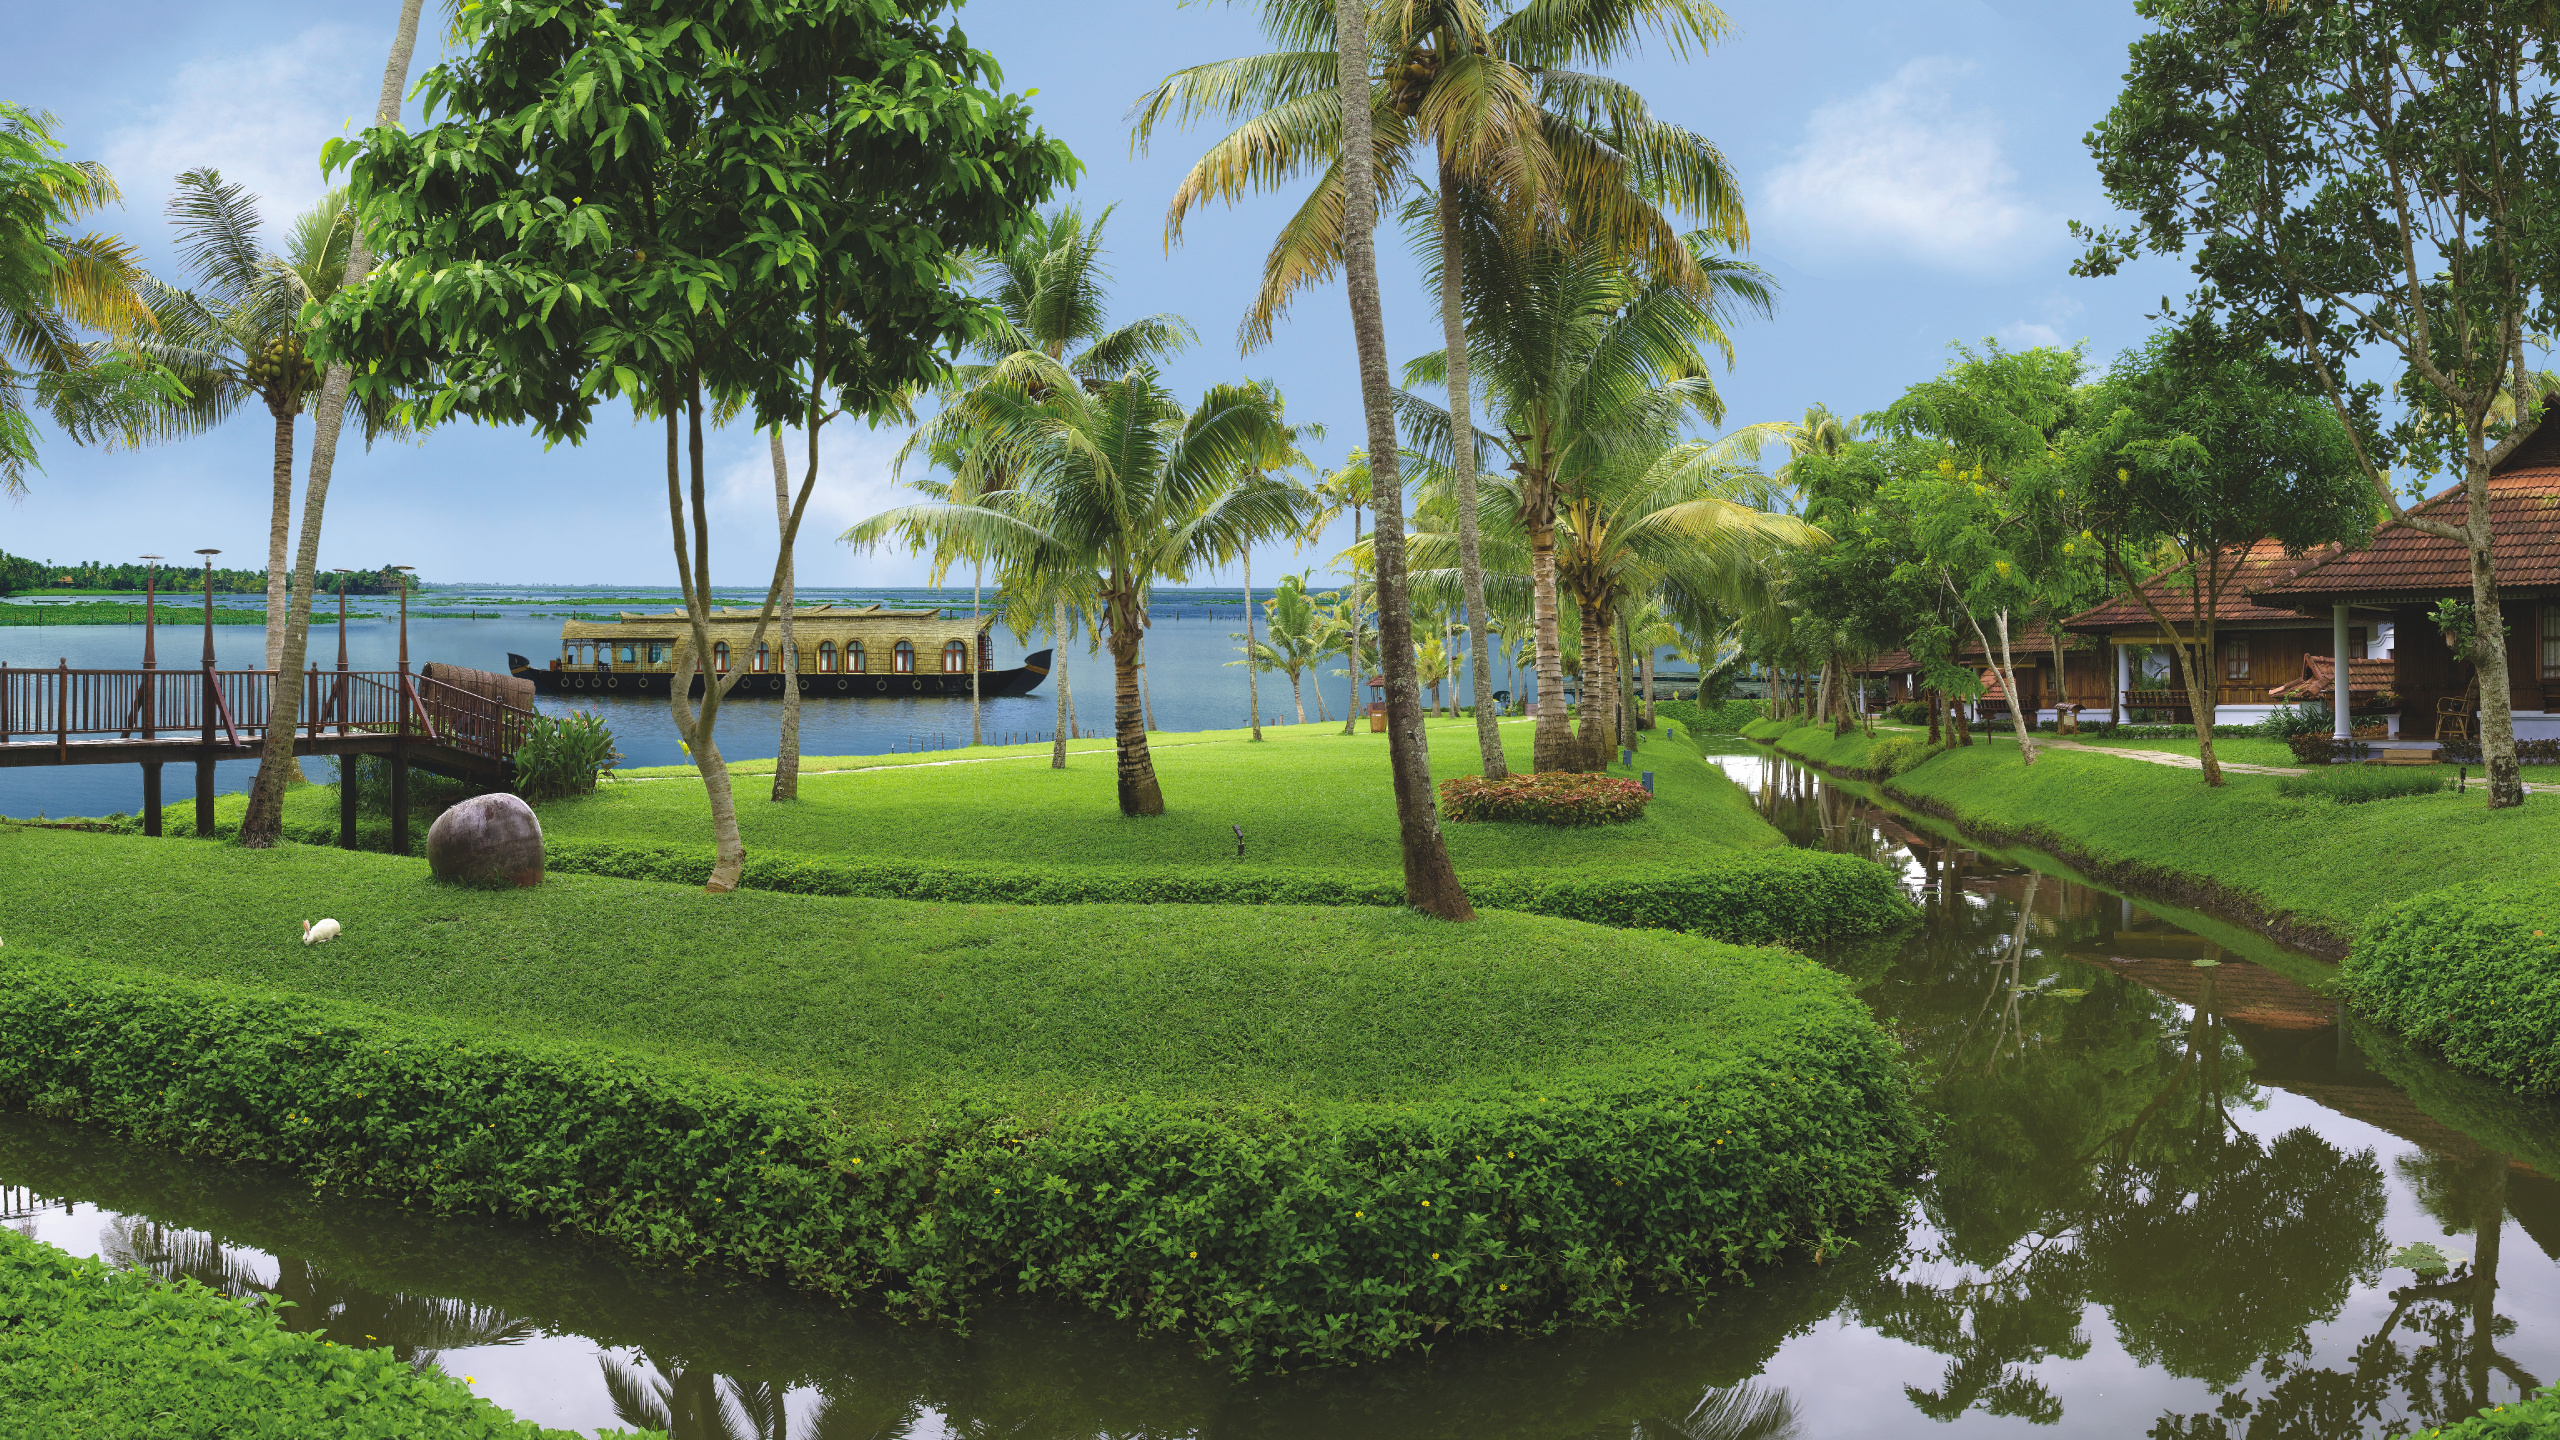 Green Palm Trees Near Body of Water During Daytime. Wallpaper in 2560x1440 Resolution